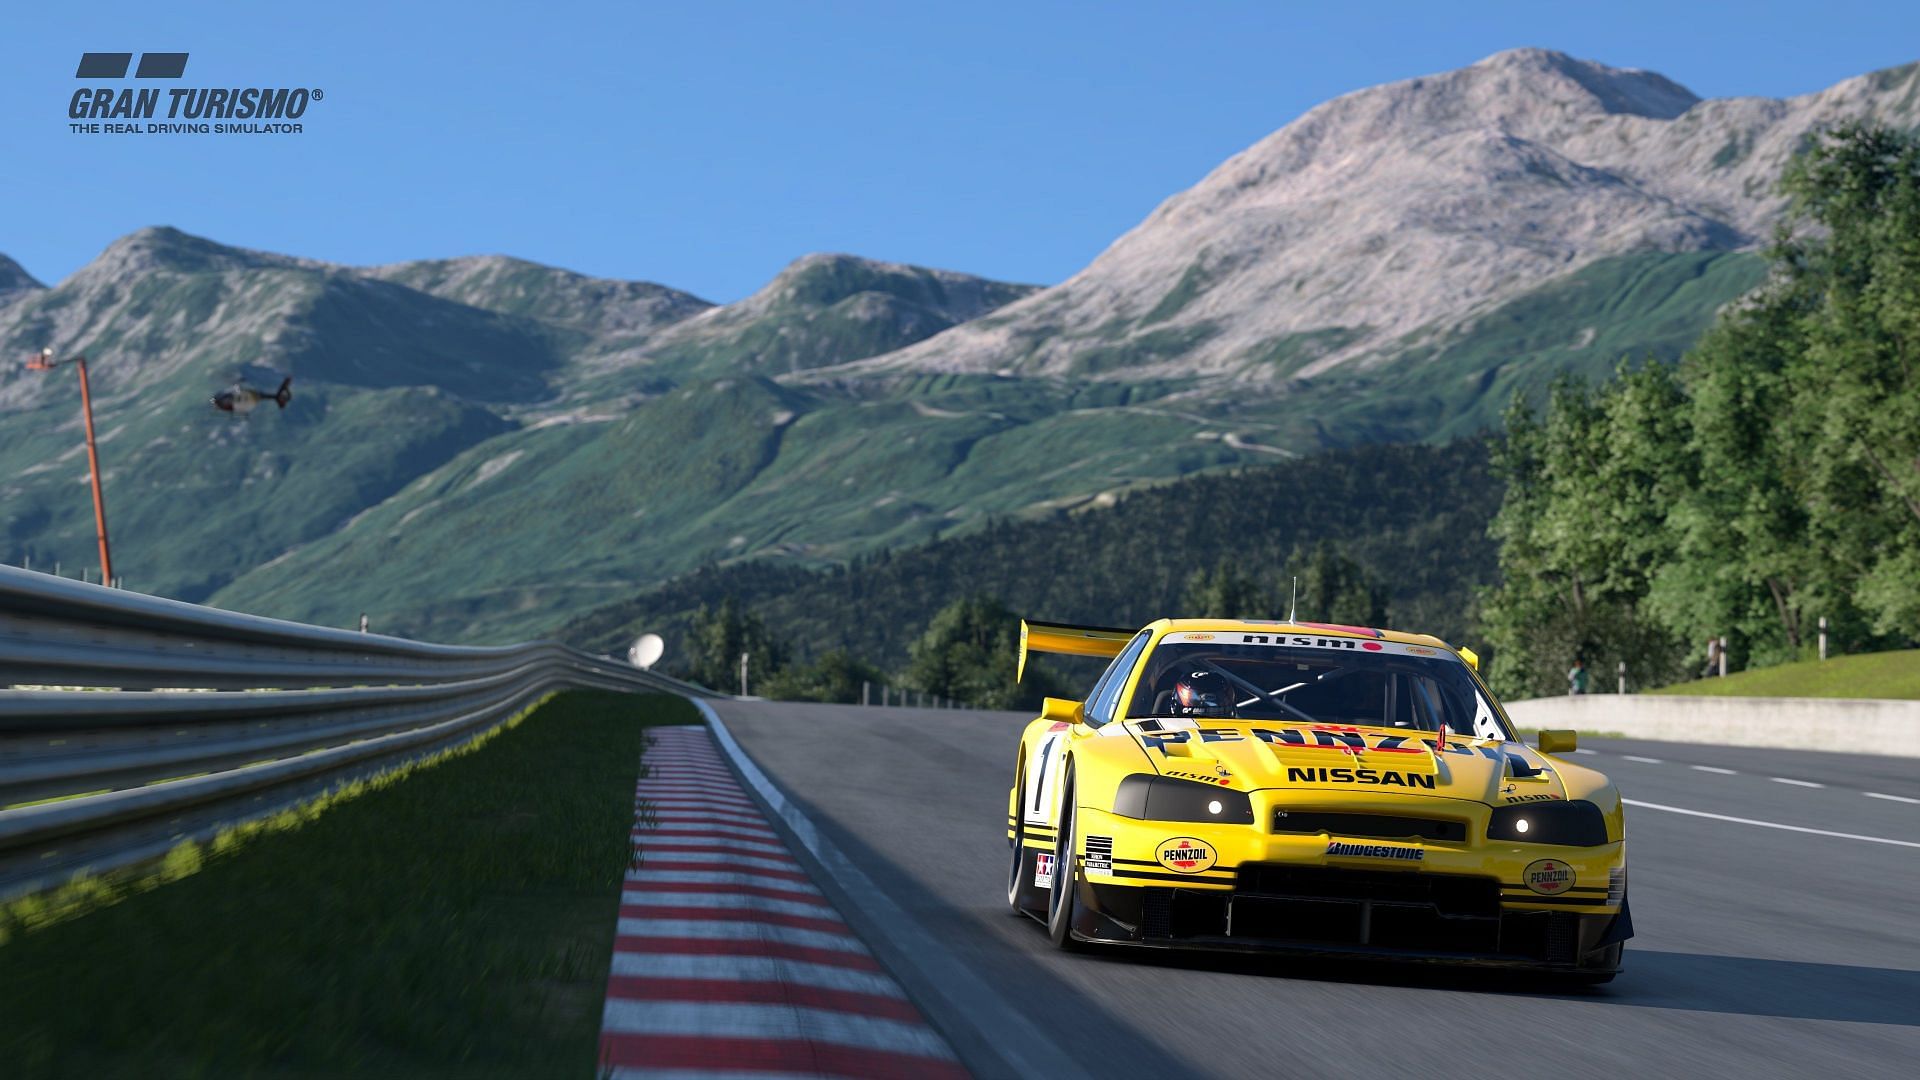 5 biggest differences between Gran Turismo 7 and Forza Horizon 5